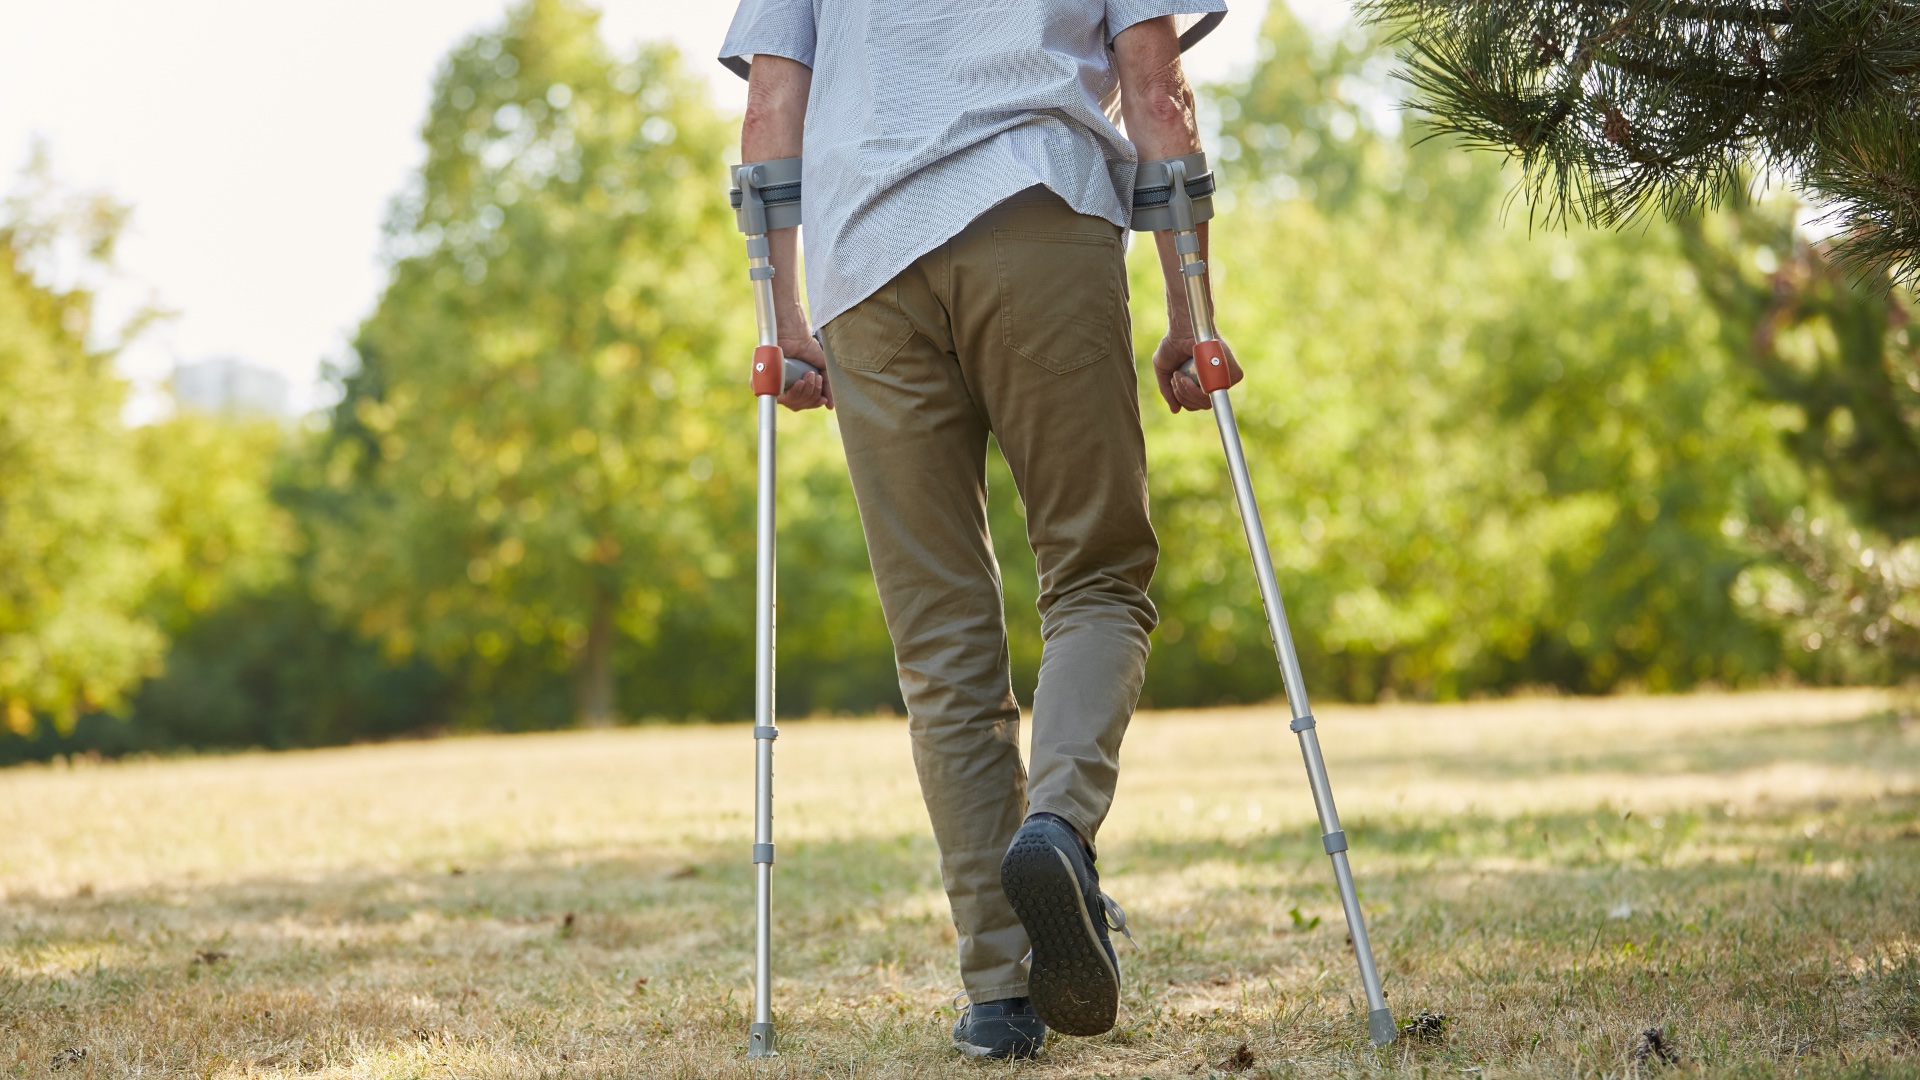 Orca Scan are trialing a Walking Aid tracking solution that will help hospitals improve and expand their existing NHS return and reuse schemes.